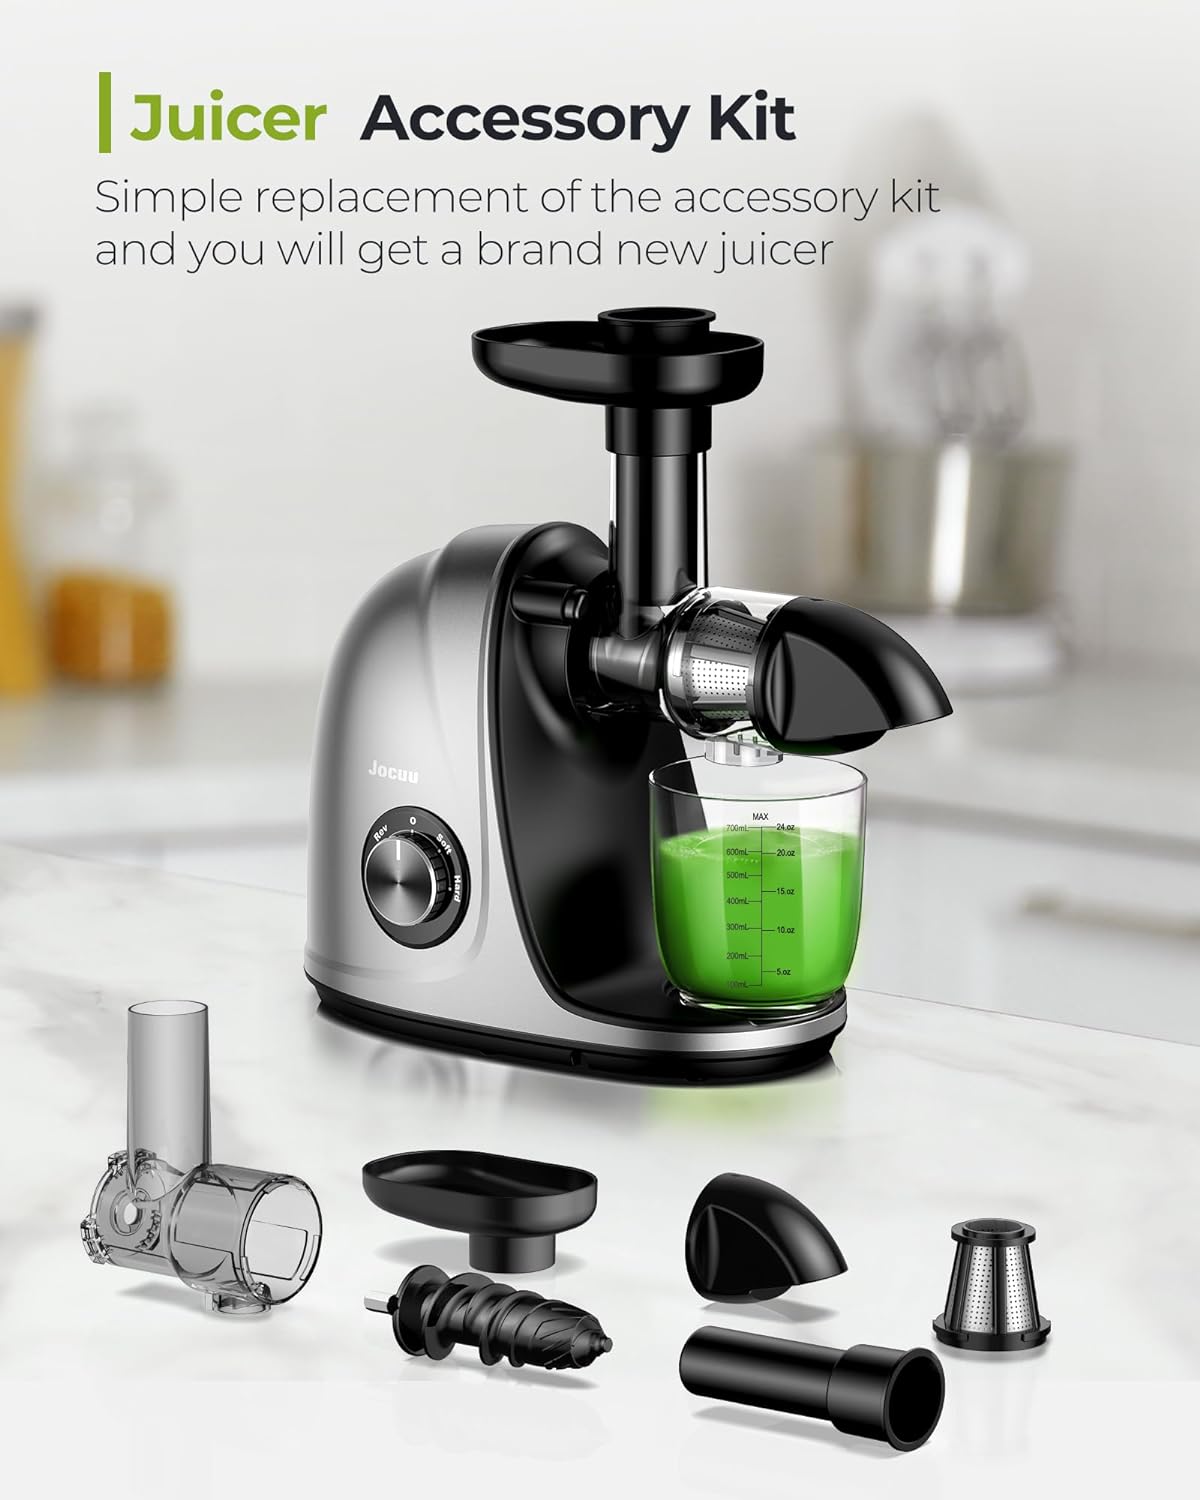 JOCUU ZM1503 Juicer Attachment Kit - Upgrade Aged Juicer to New One with Body, Auger, Filter, Chute & Cup,Compatible with JOCUU AMZCHEF Slow Juicer